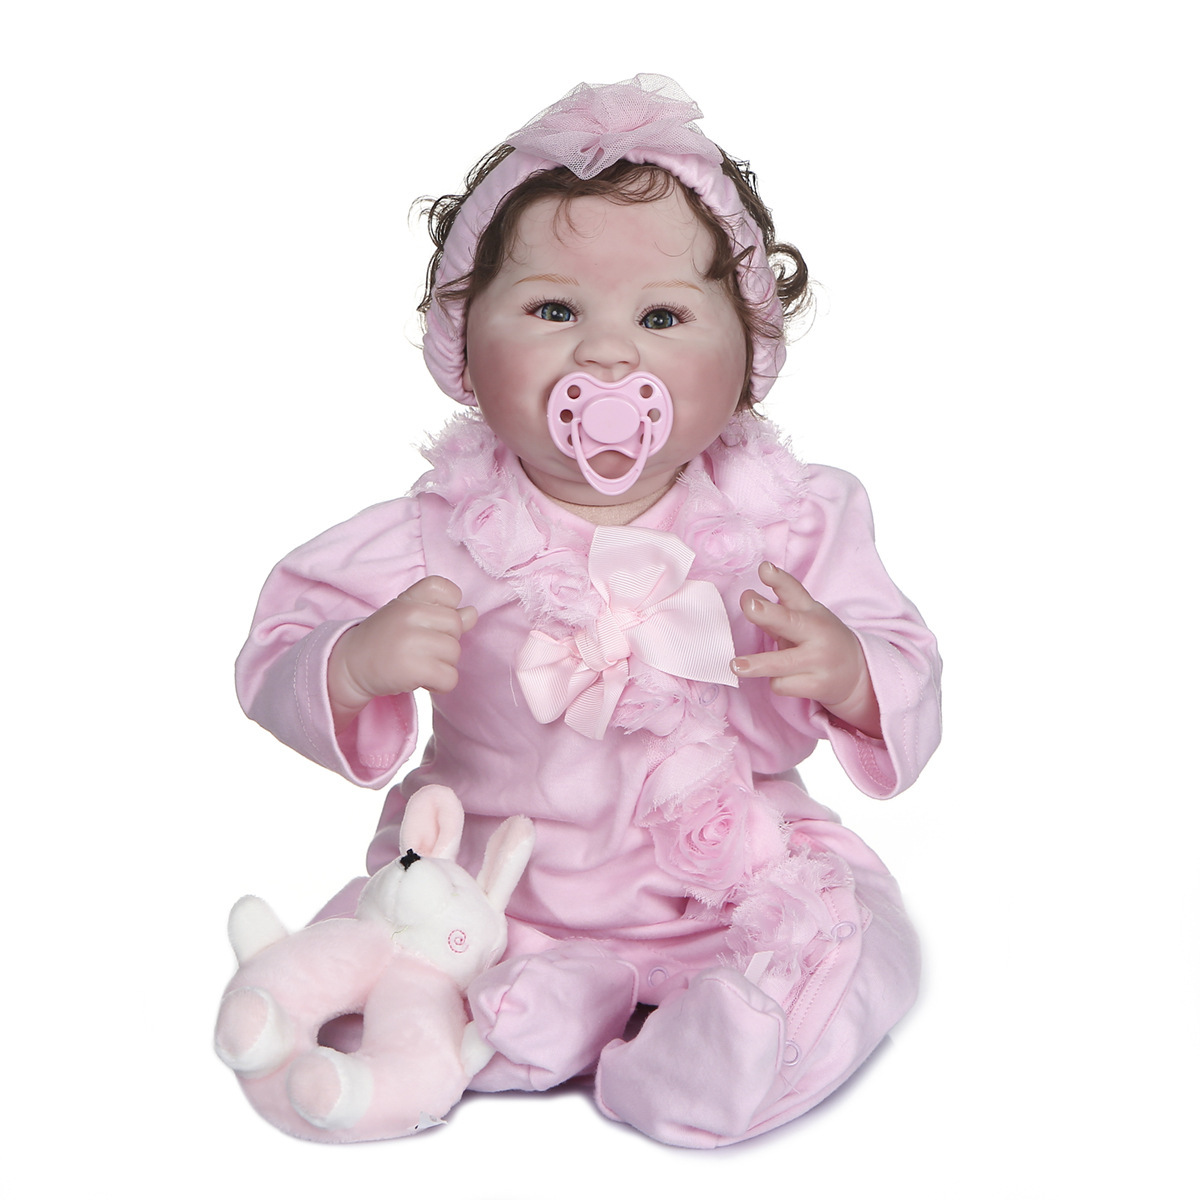 CozyPlushies Adorable Smiling Reborn Baby Toy with Acrylic Eyes - Perfect Gift